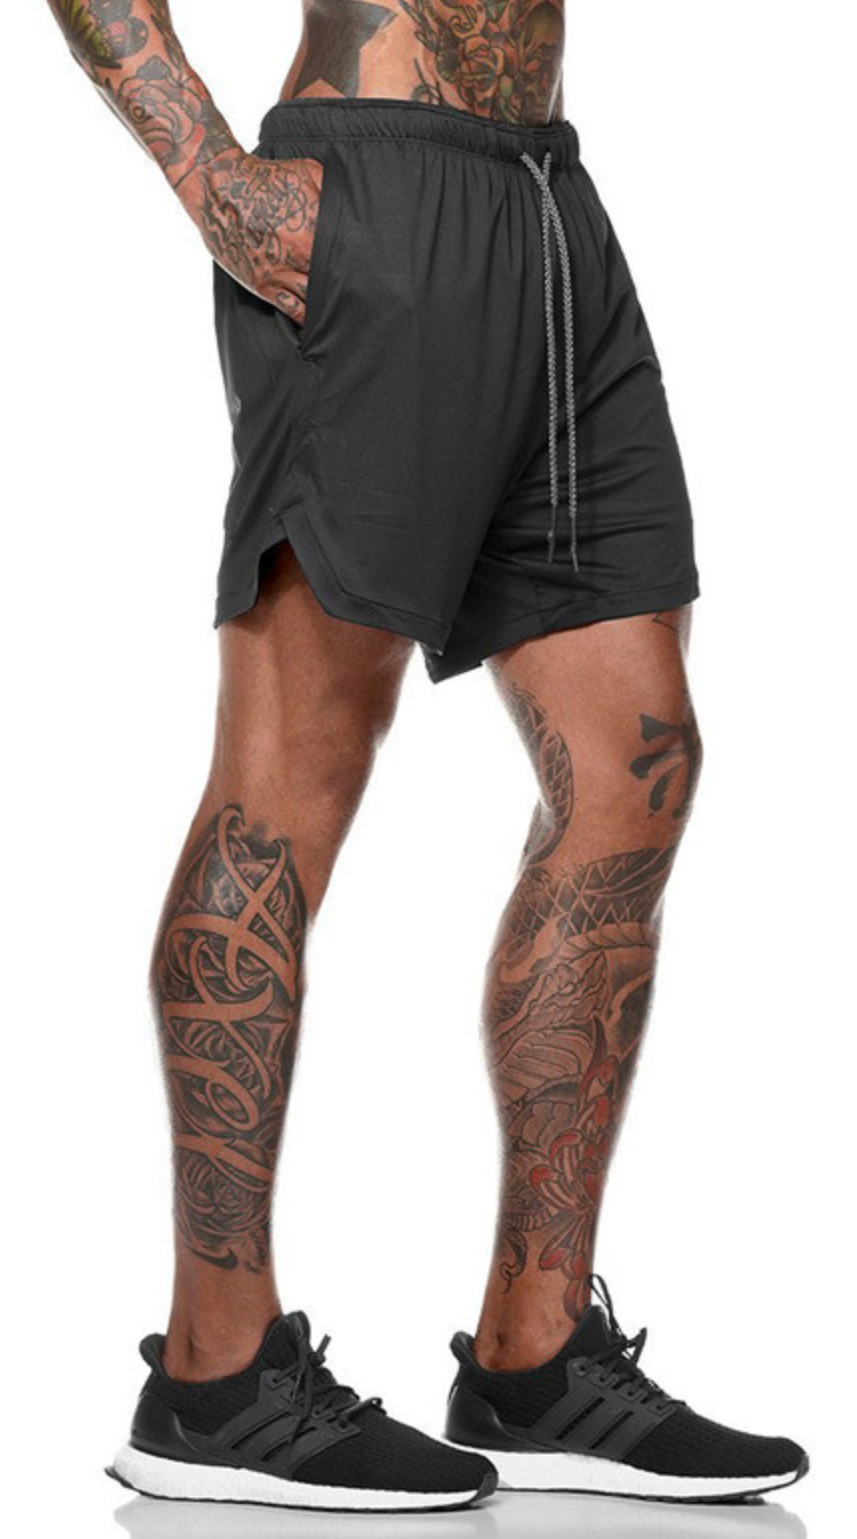 2 in 1 Gym Shorts